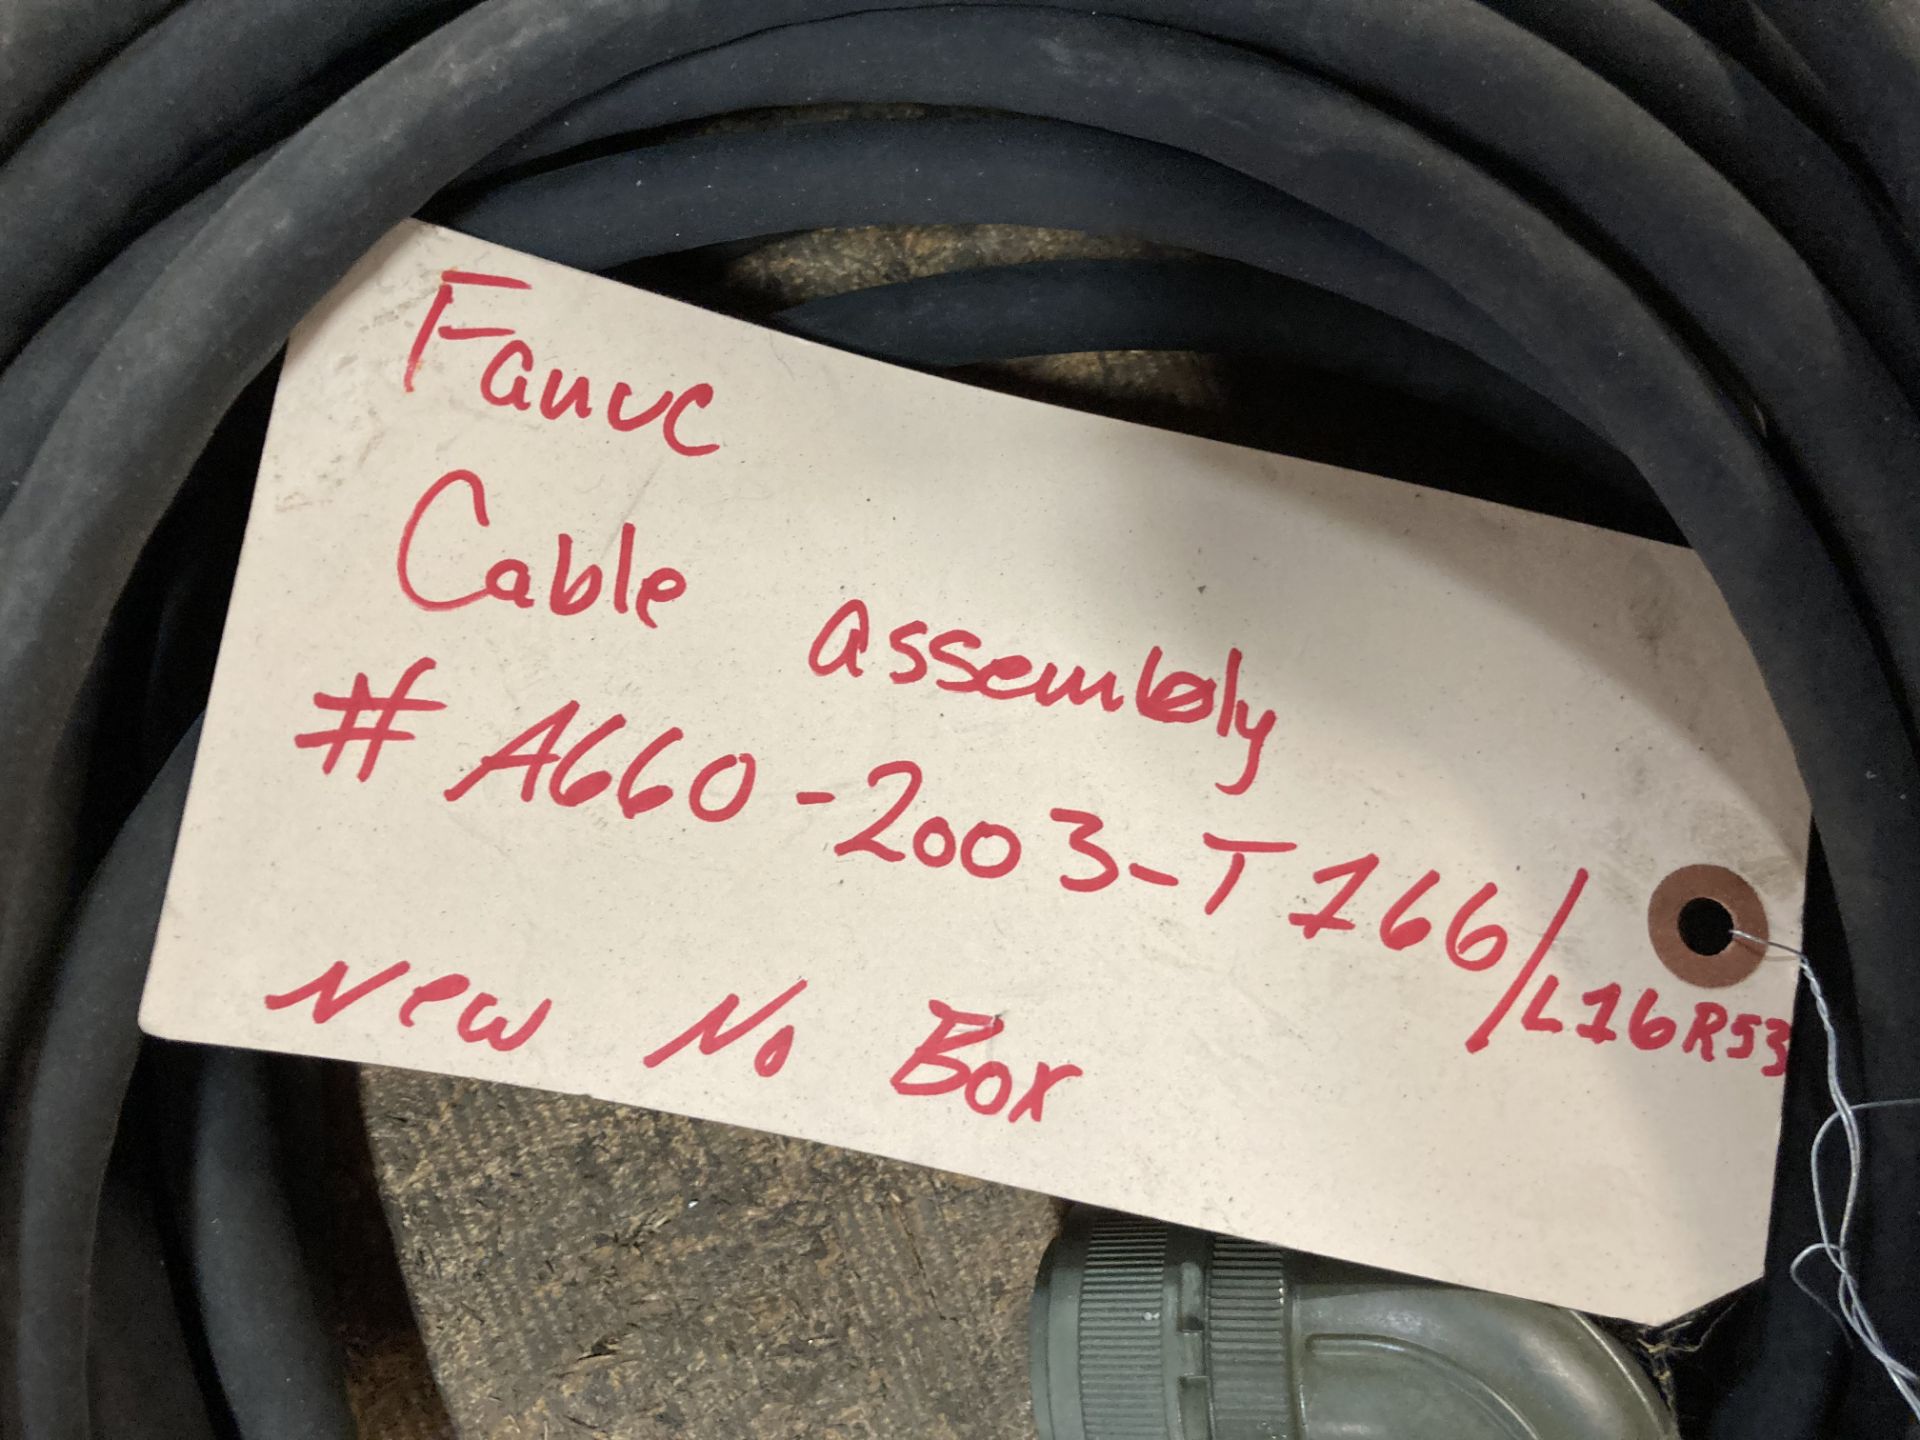 Lot of Fanuc Cable Assemblies - Image 9 of 13